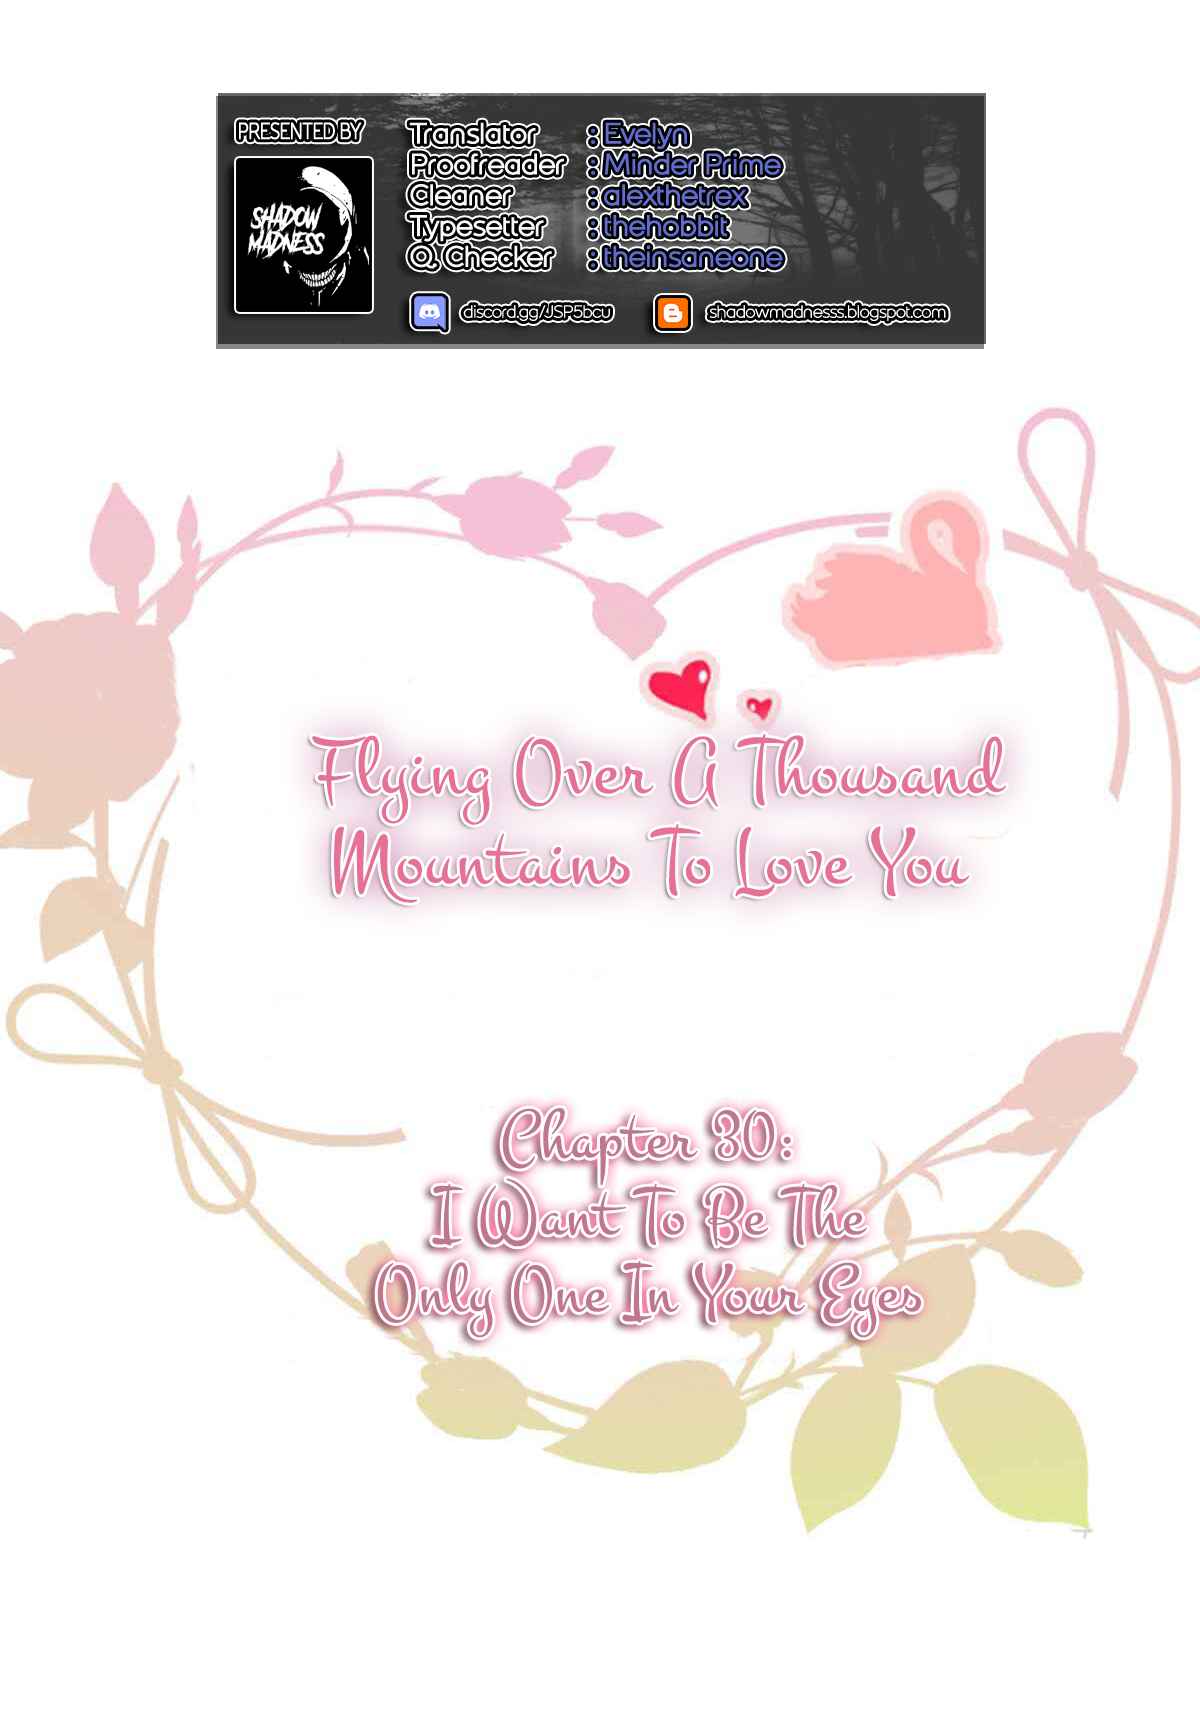 Flying Over a Thousand Mountains to Love You Ch. 30 I want to be the only one in your eyes